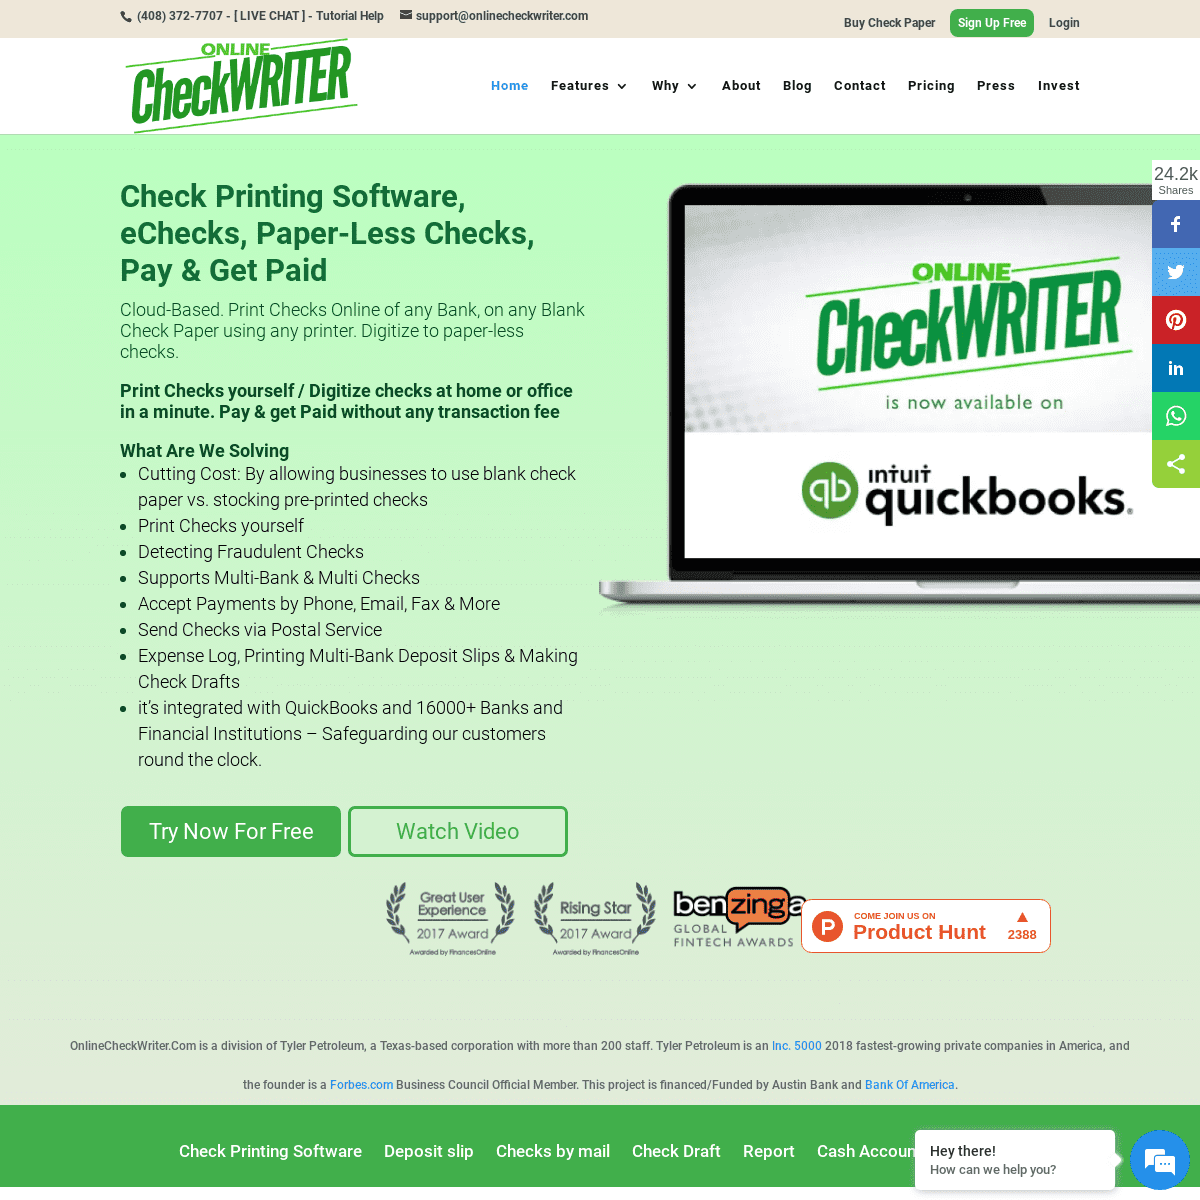 A complete backup of onlinecheckwriter.com